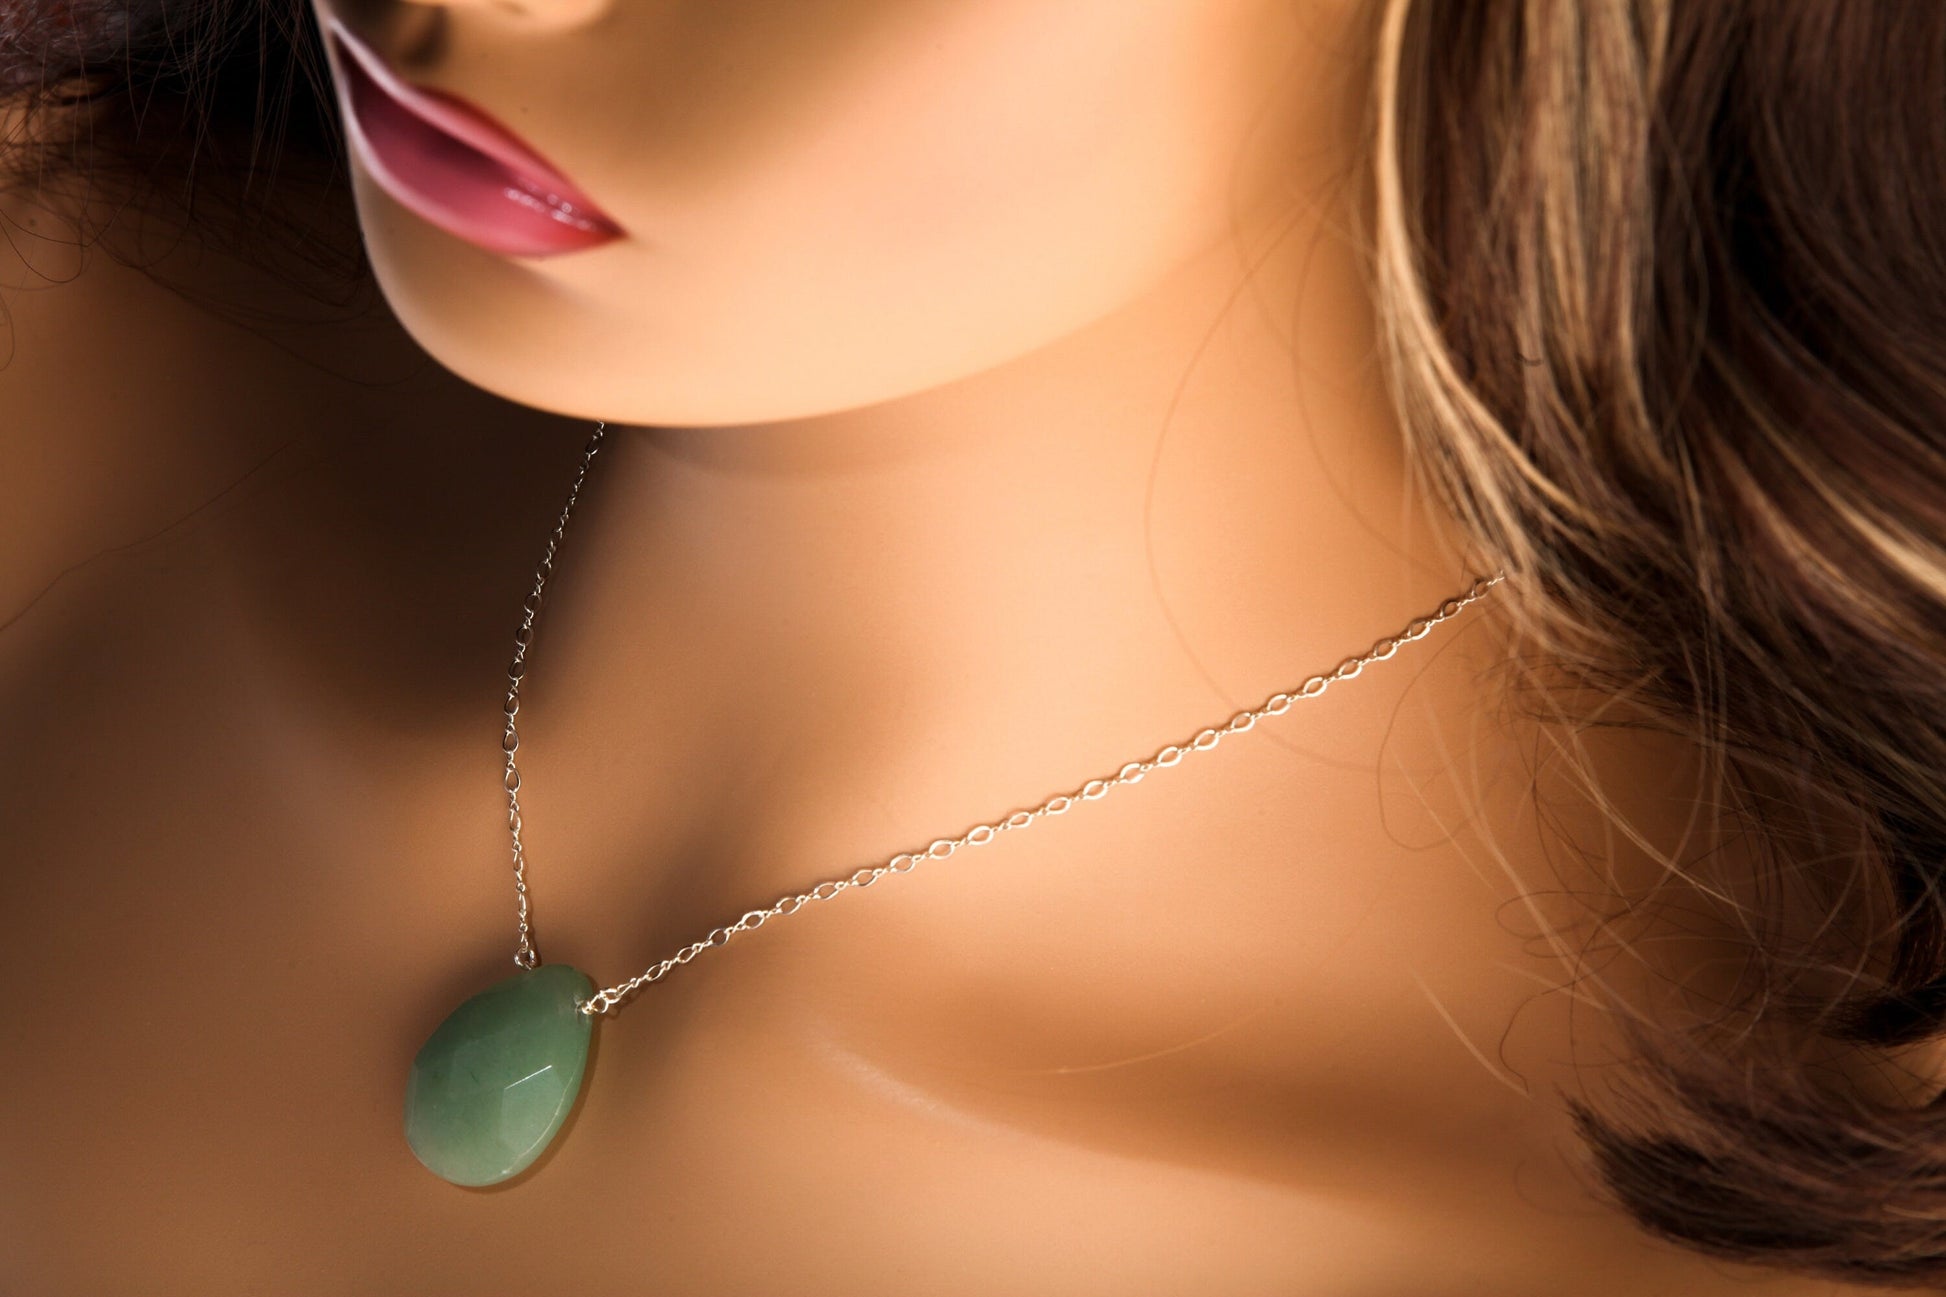 Green Aventurine Natural Gemstones Faceted large Pear Drop 22x30mm in 925 Sterling Silver or 14K Gold Filled Chain